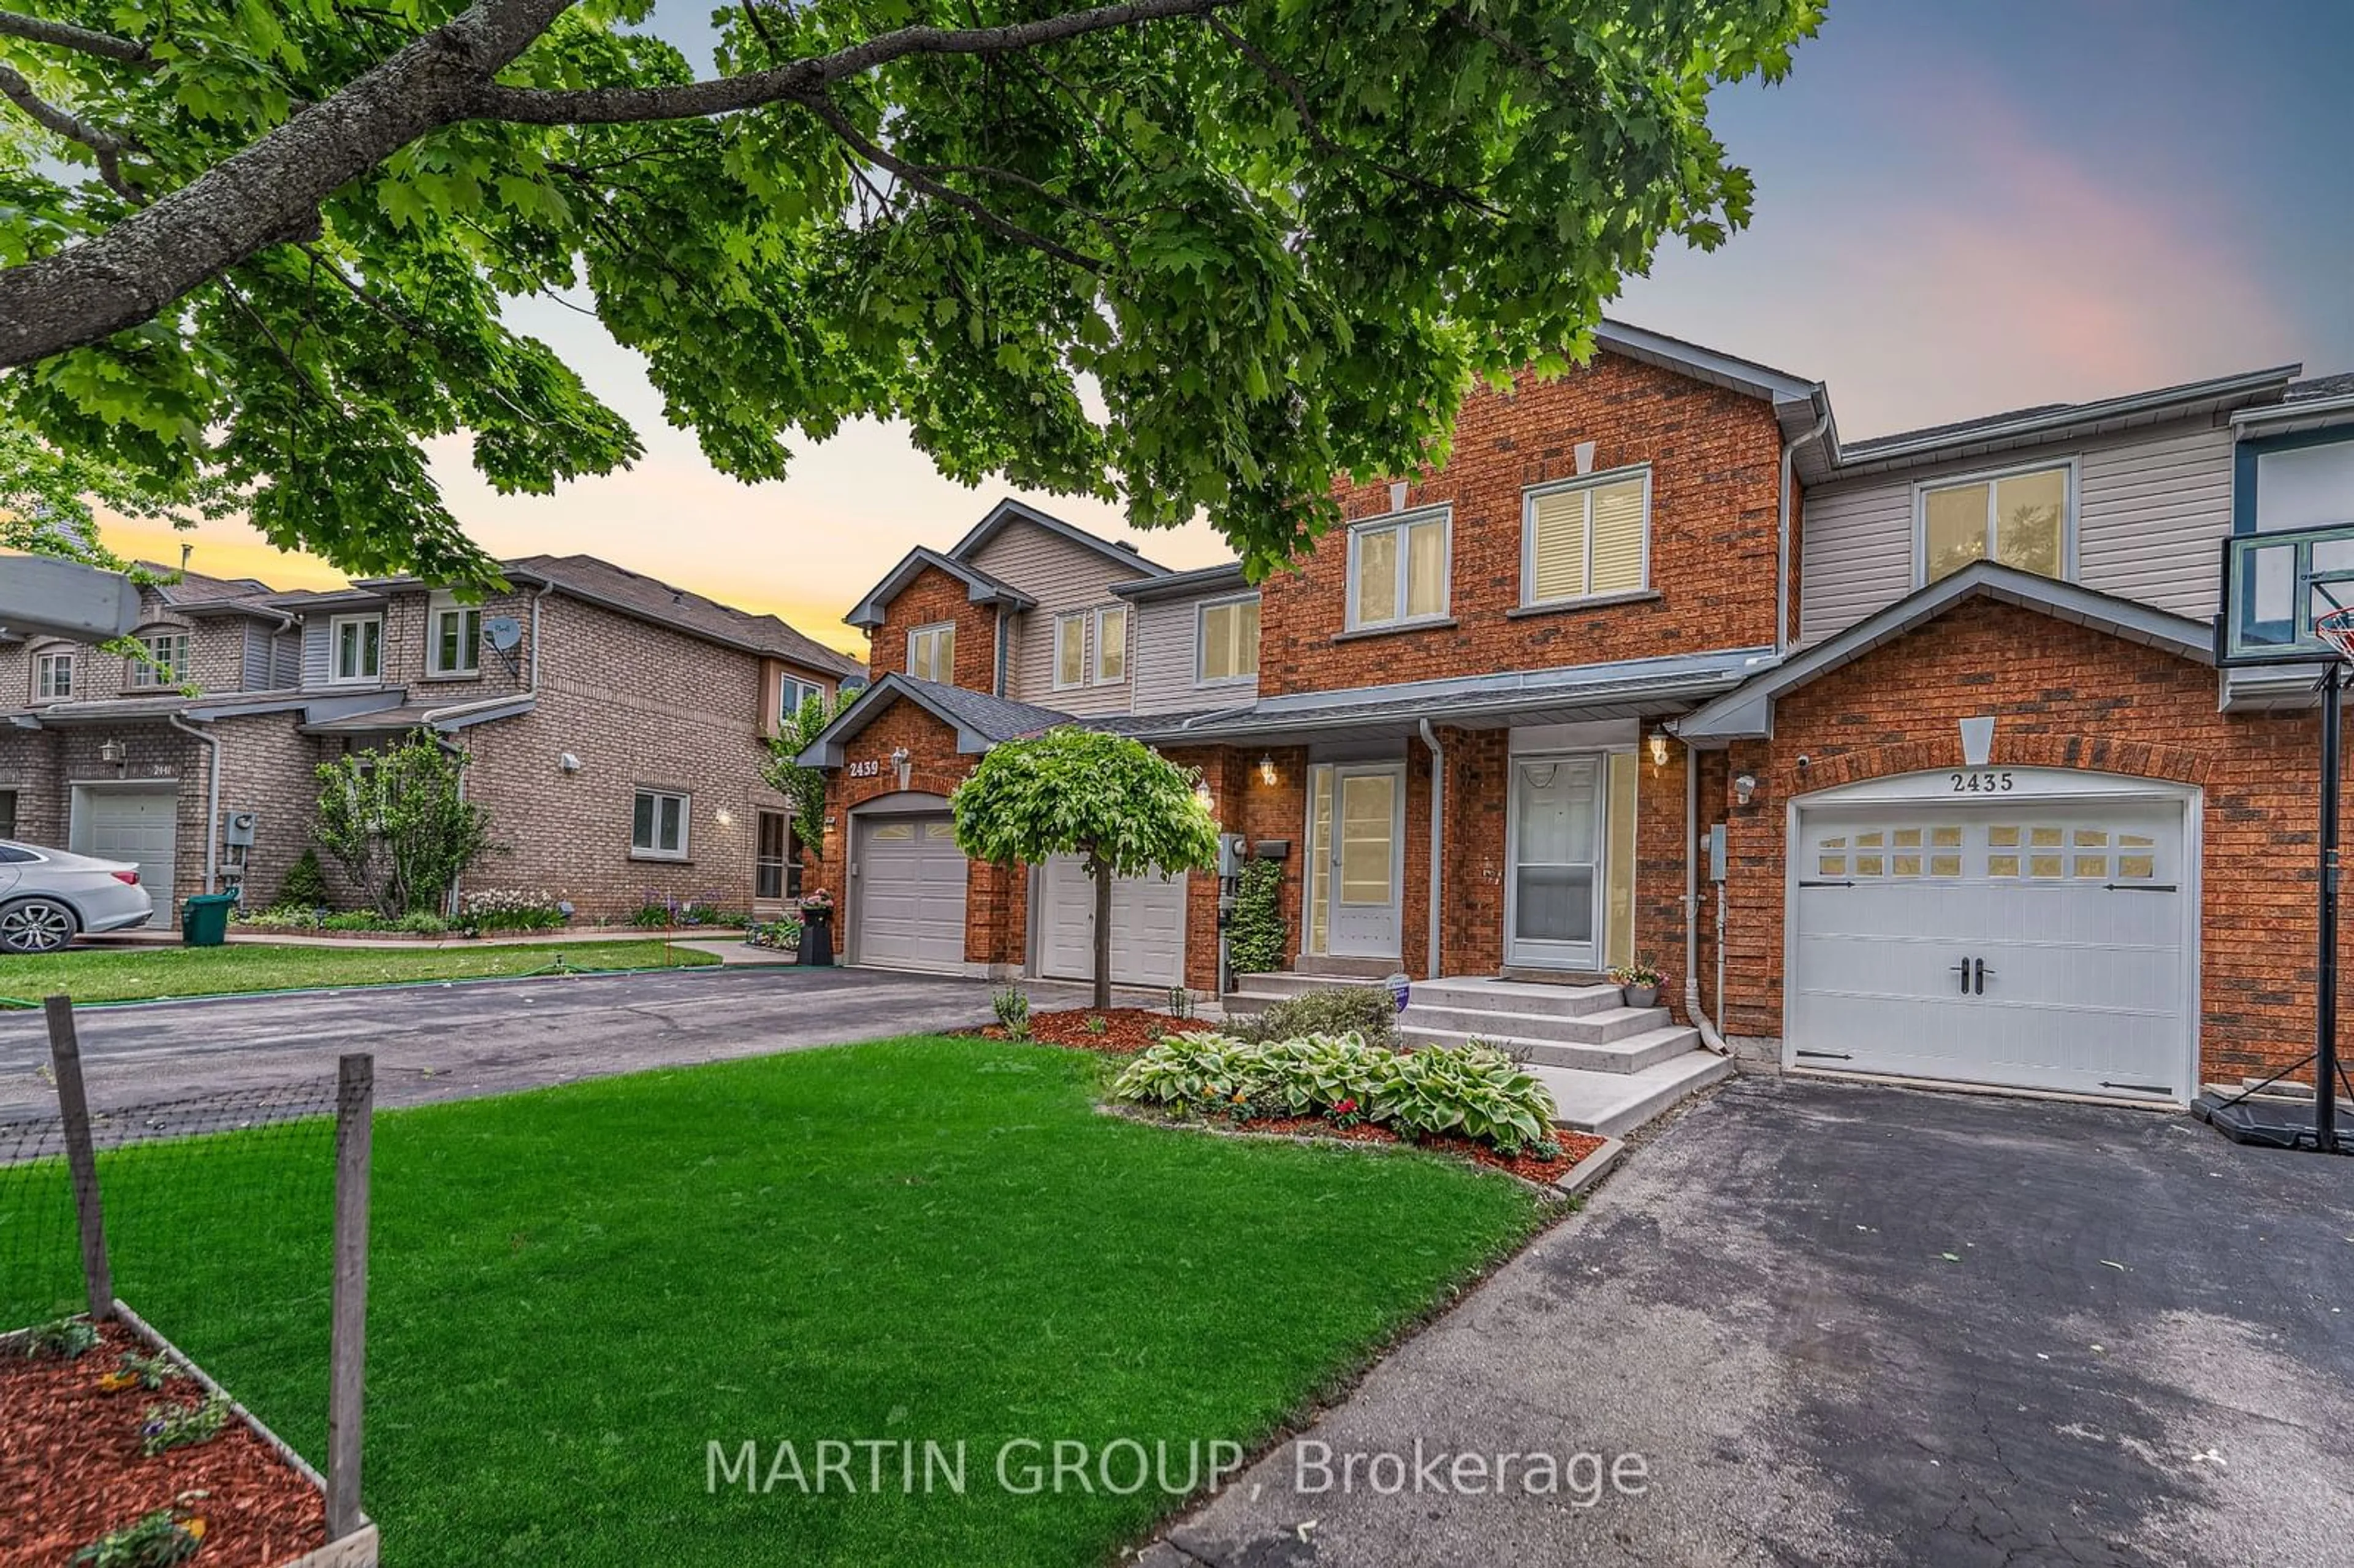 Home with brick exterior material for 2435 STEFI Tr, Oakville Ontario L6H 5Y4